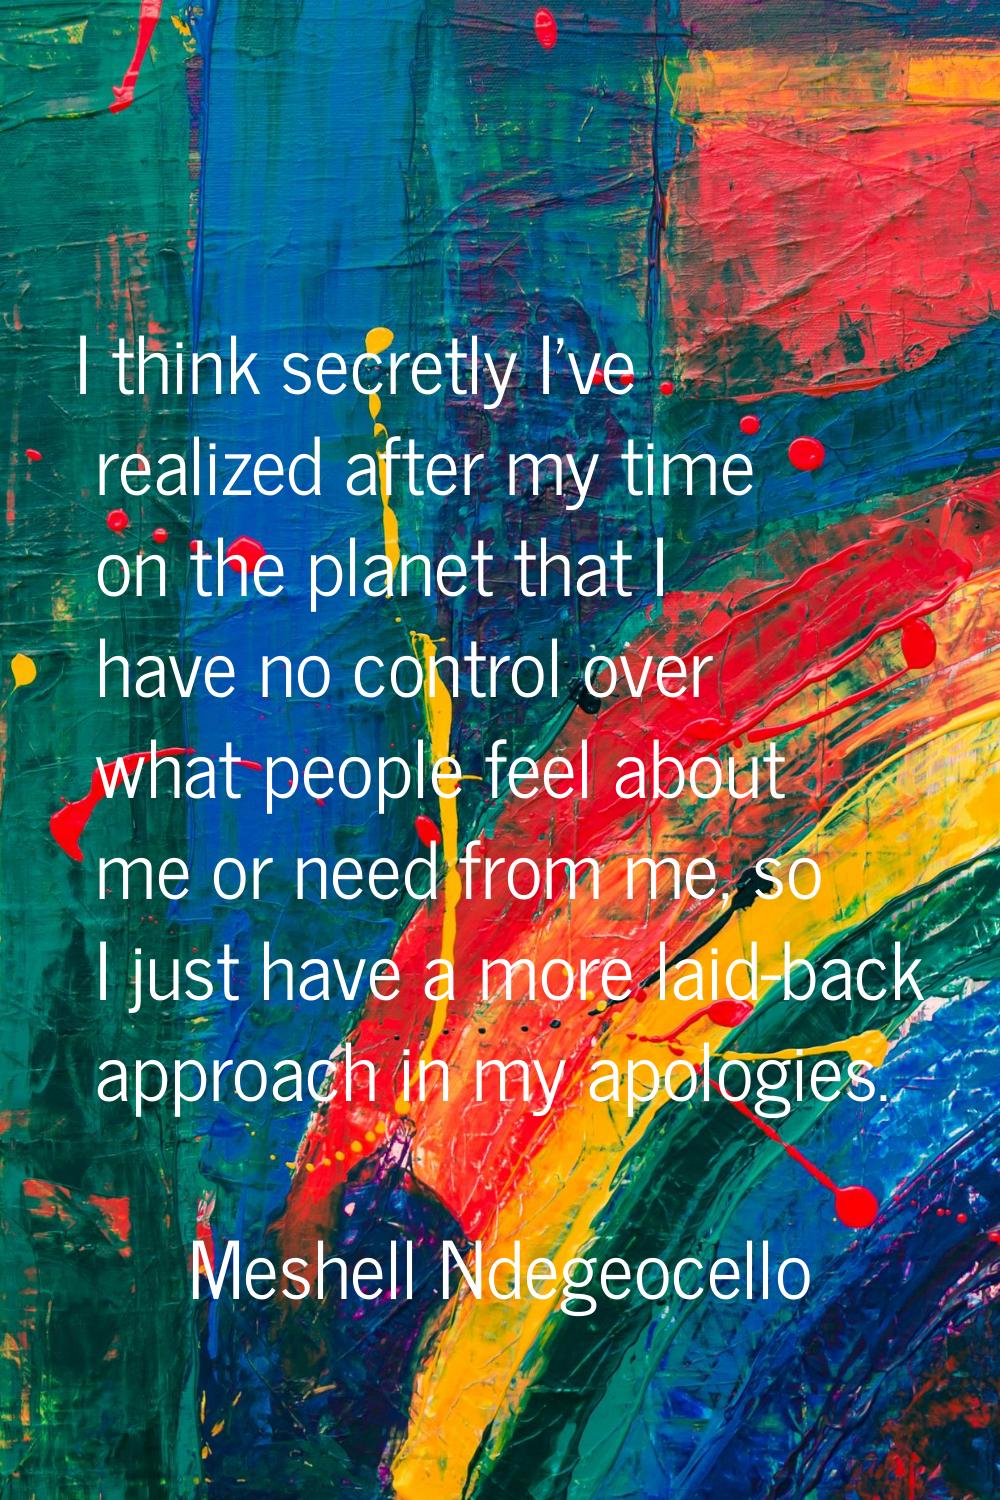 I think secretly I've realized after my time on the planet that I have no control over what people 